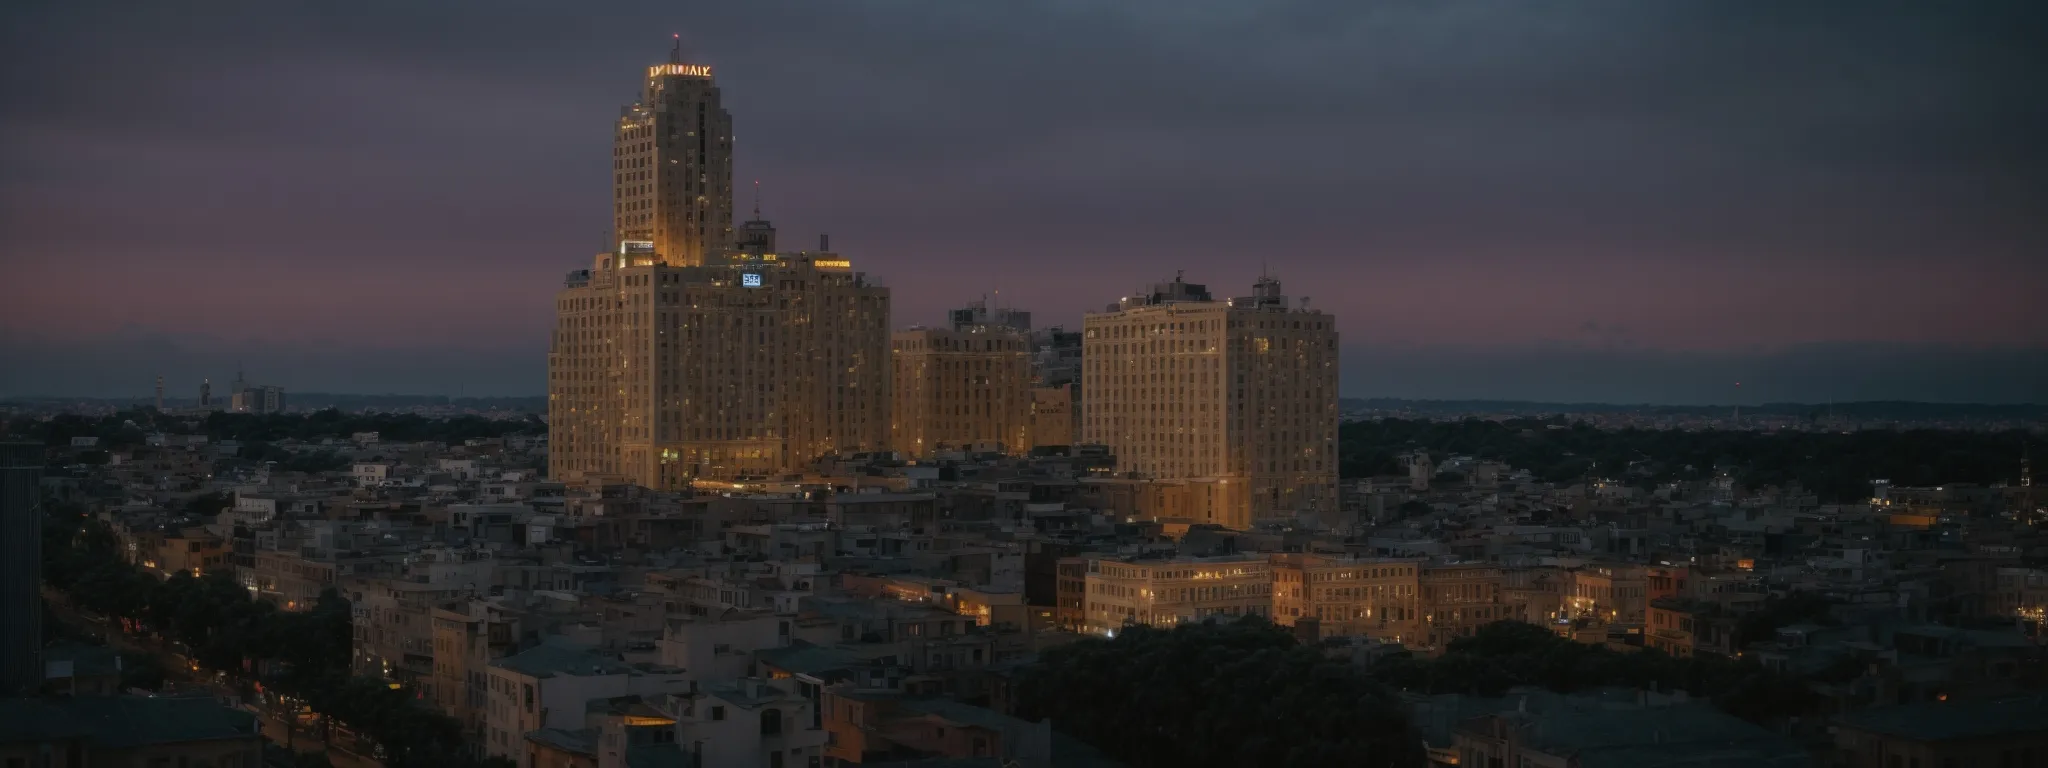 a cityscape at dusk with a prominent hotel facade illuminated, standing out amidst the surrounding architecture.